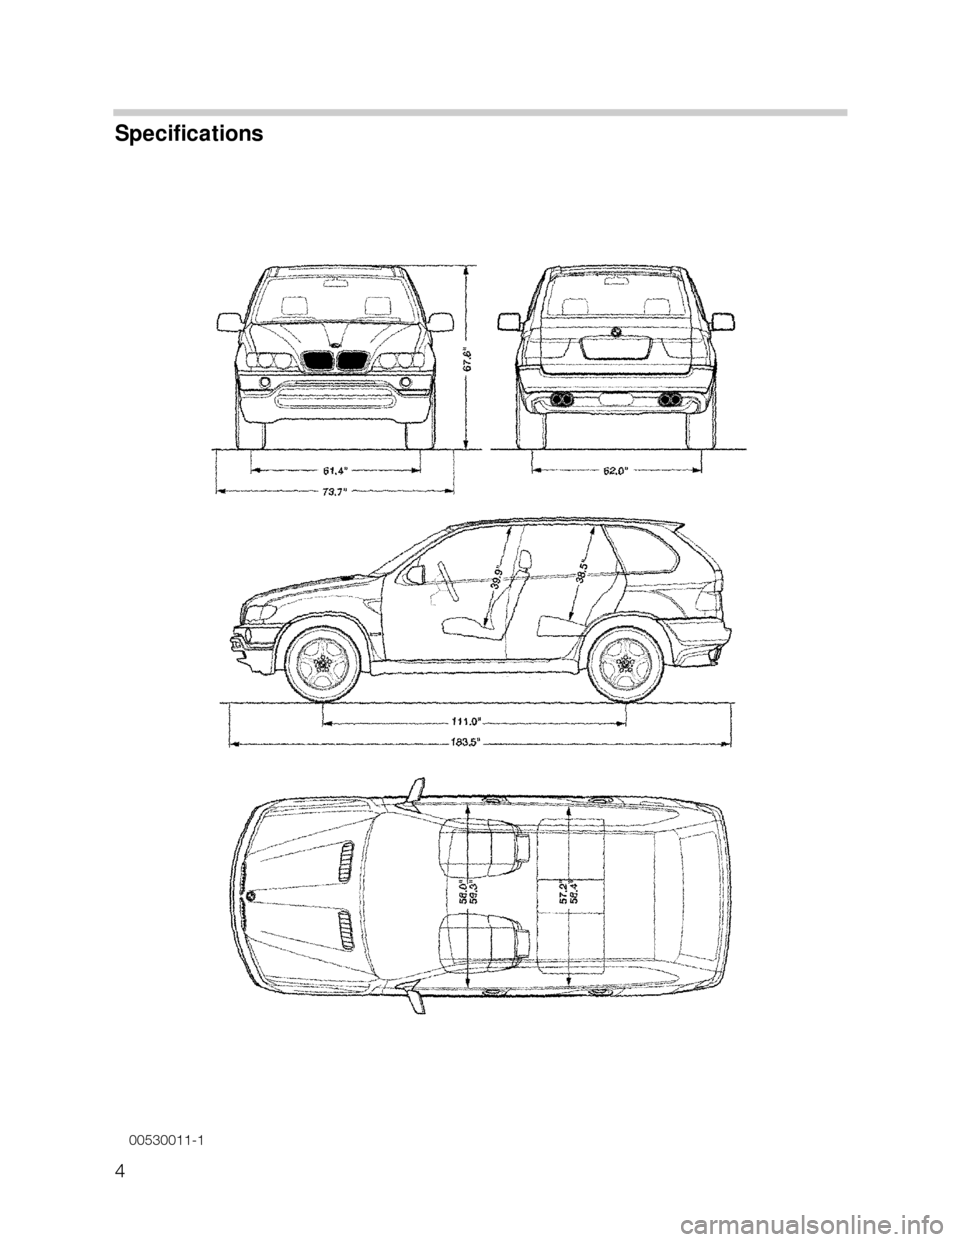 BMW X5 2003 E53 Workshop Manual 4
Specifications
00530011-1 